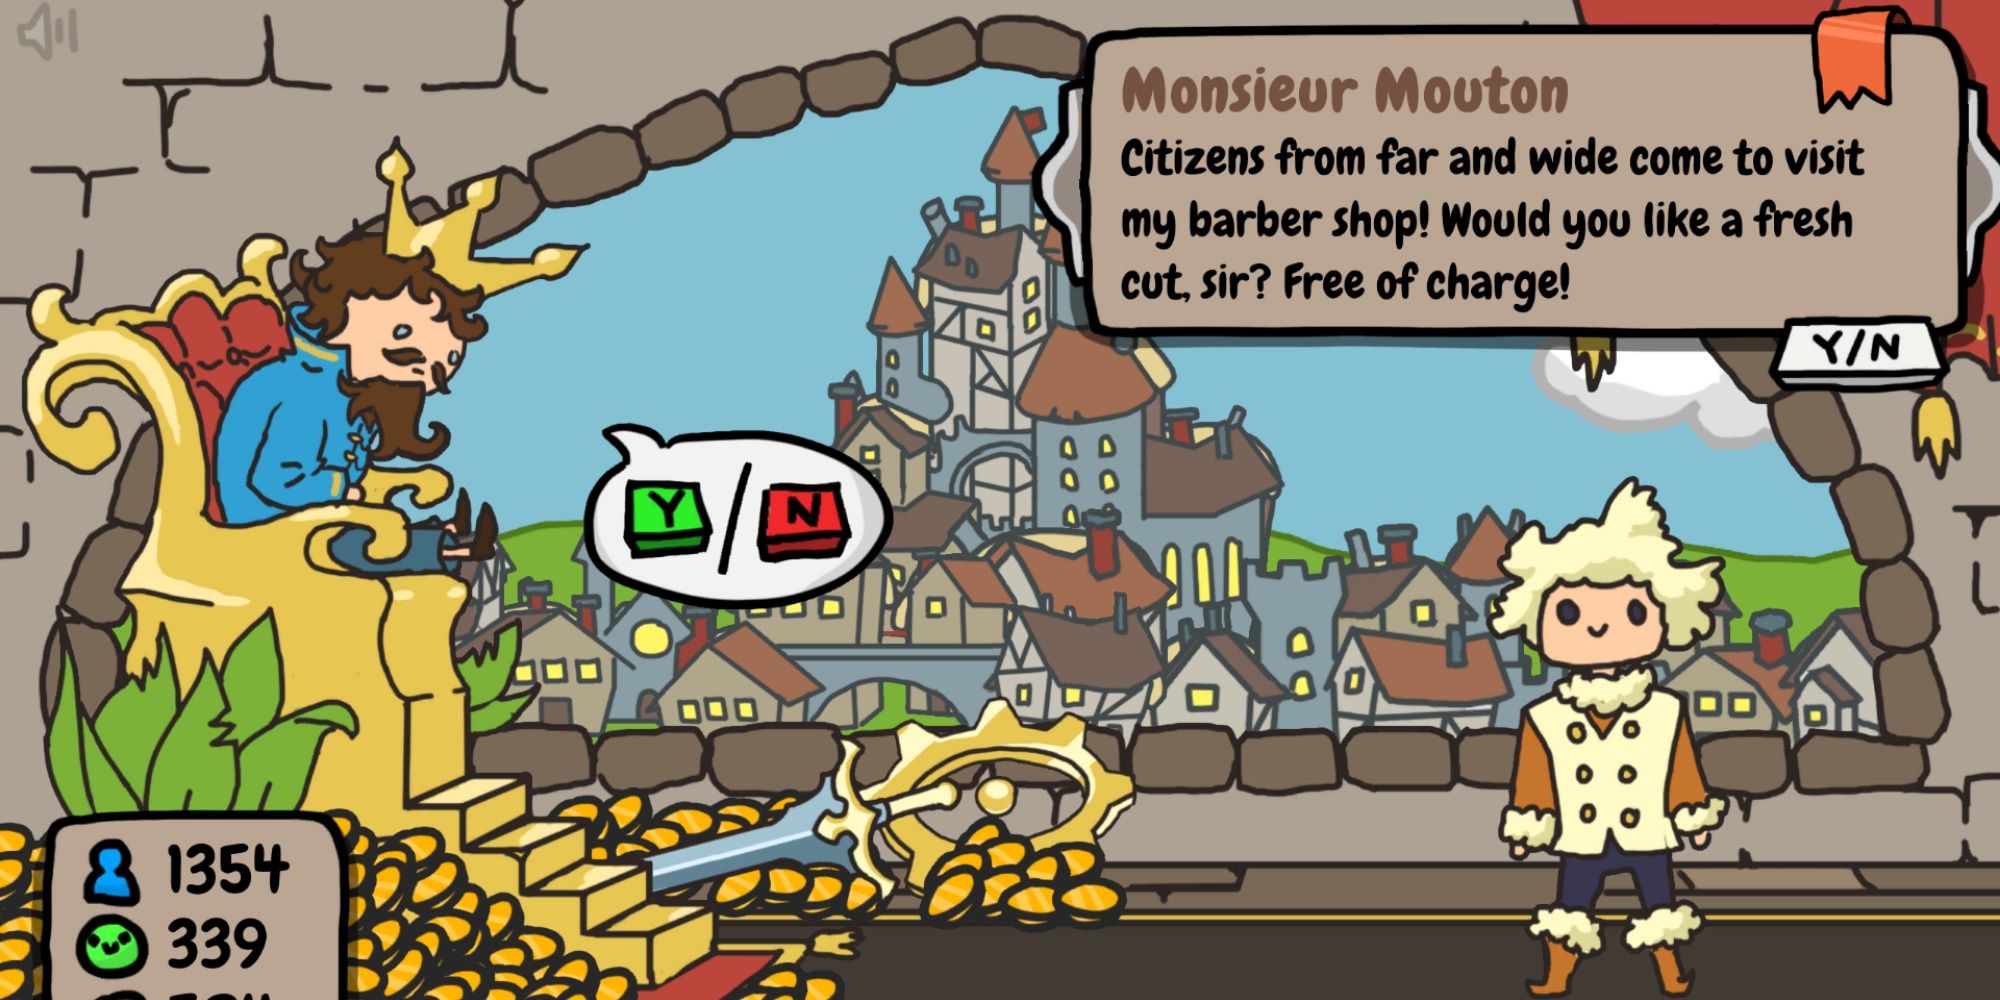 A slouched cartoon king sits on a throne of gold, while a character named Monsieur Mouton asks him if he would like a haircut